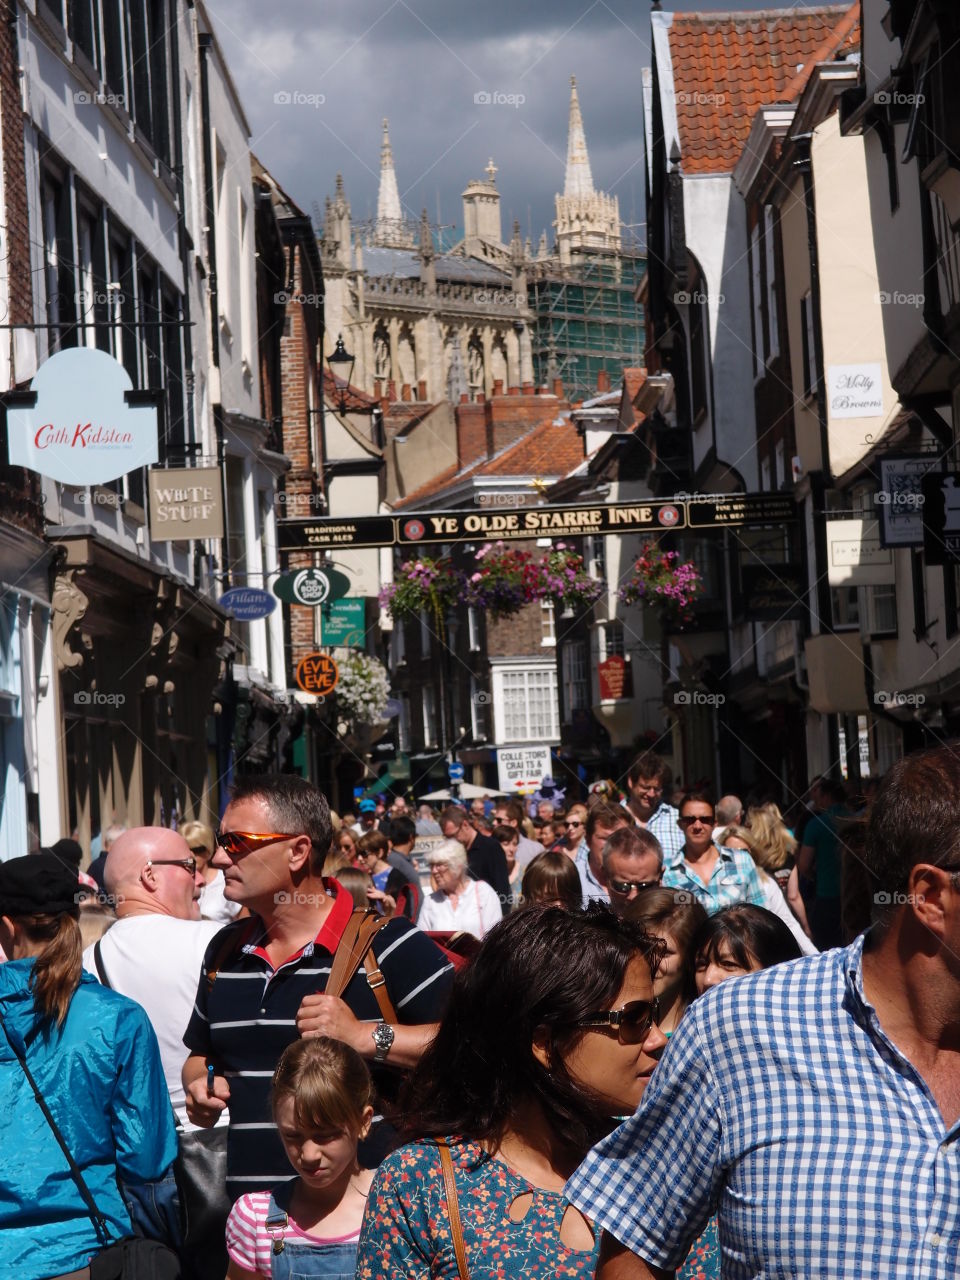 Crowds of people walking through shopping districts in An English town on a sunny summer day. 